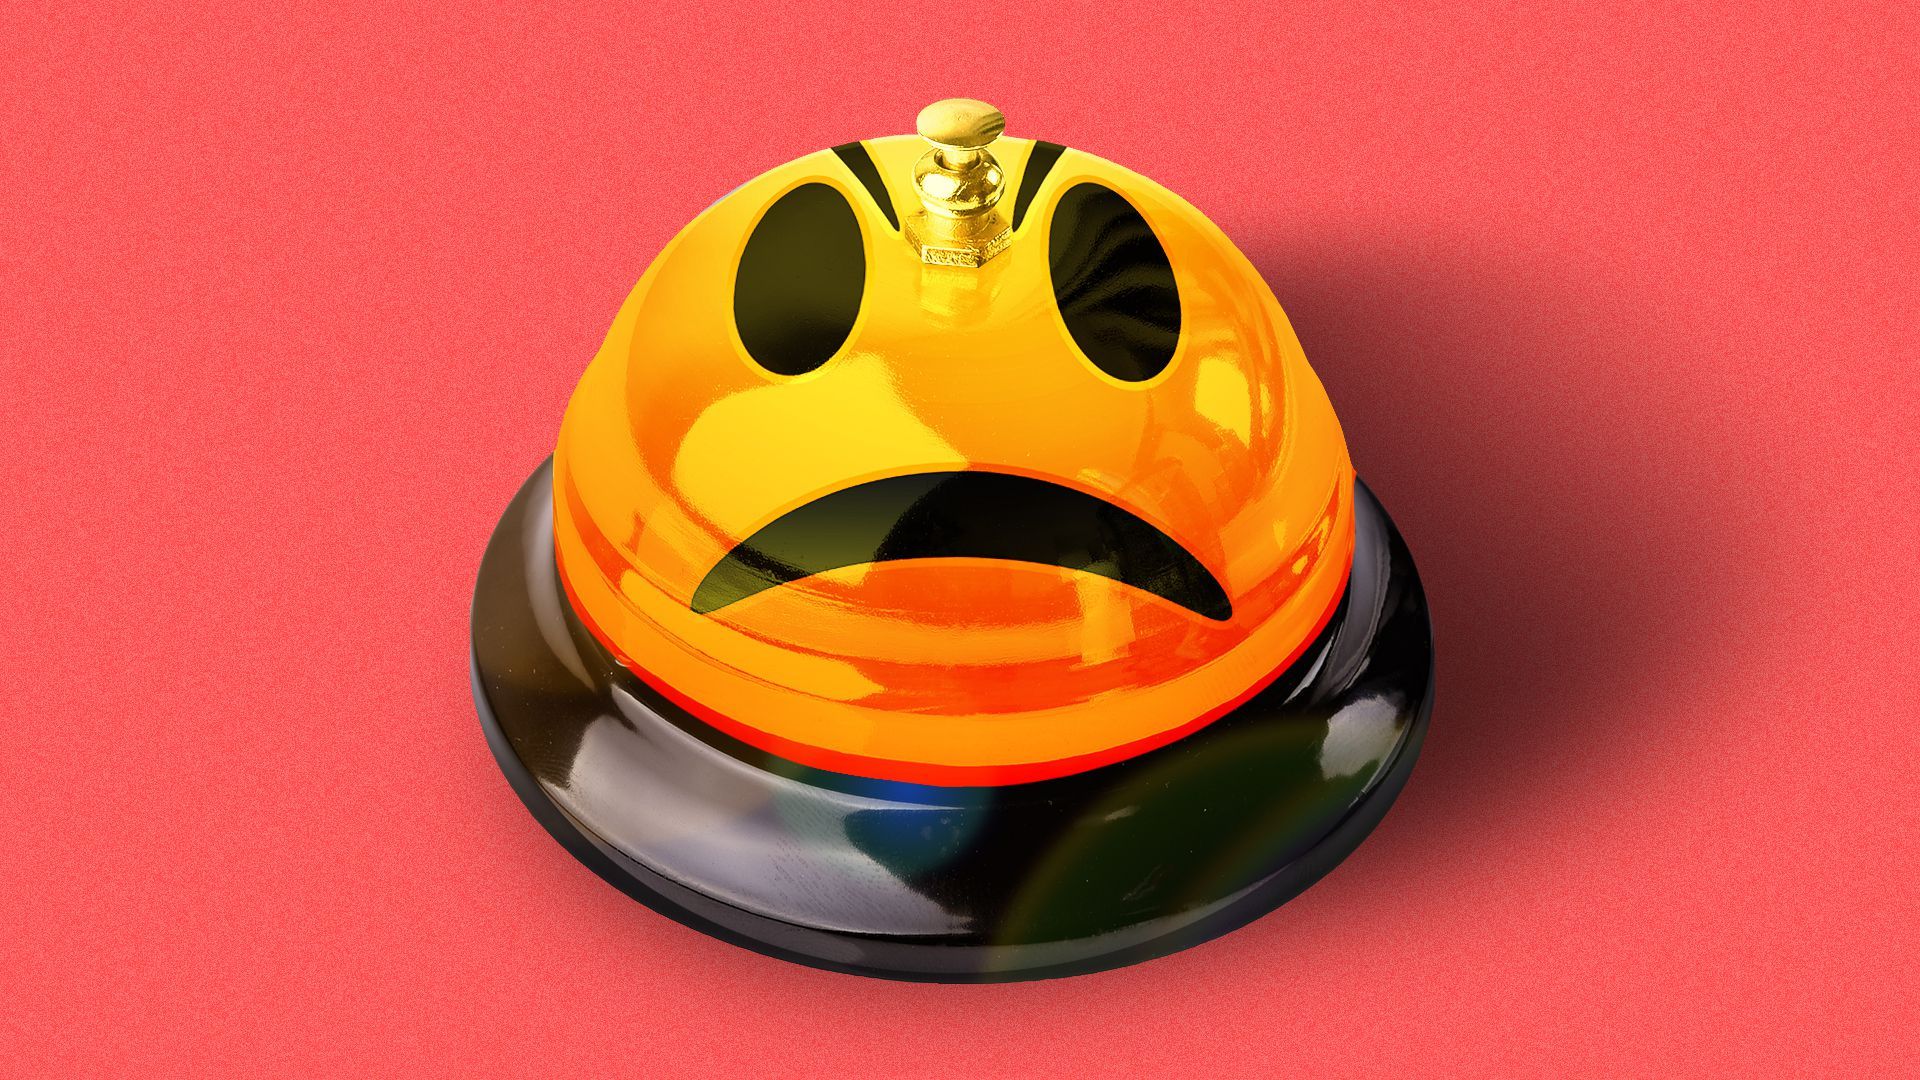 Illustration of a service bell with an angry emoji on the bell